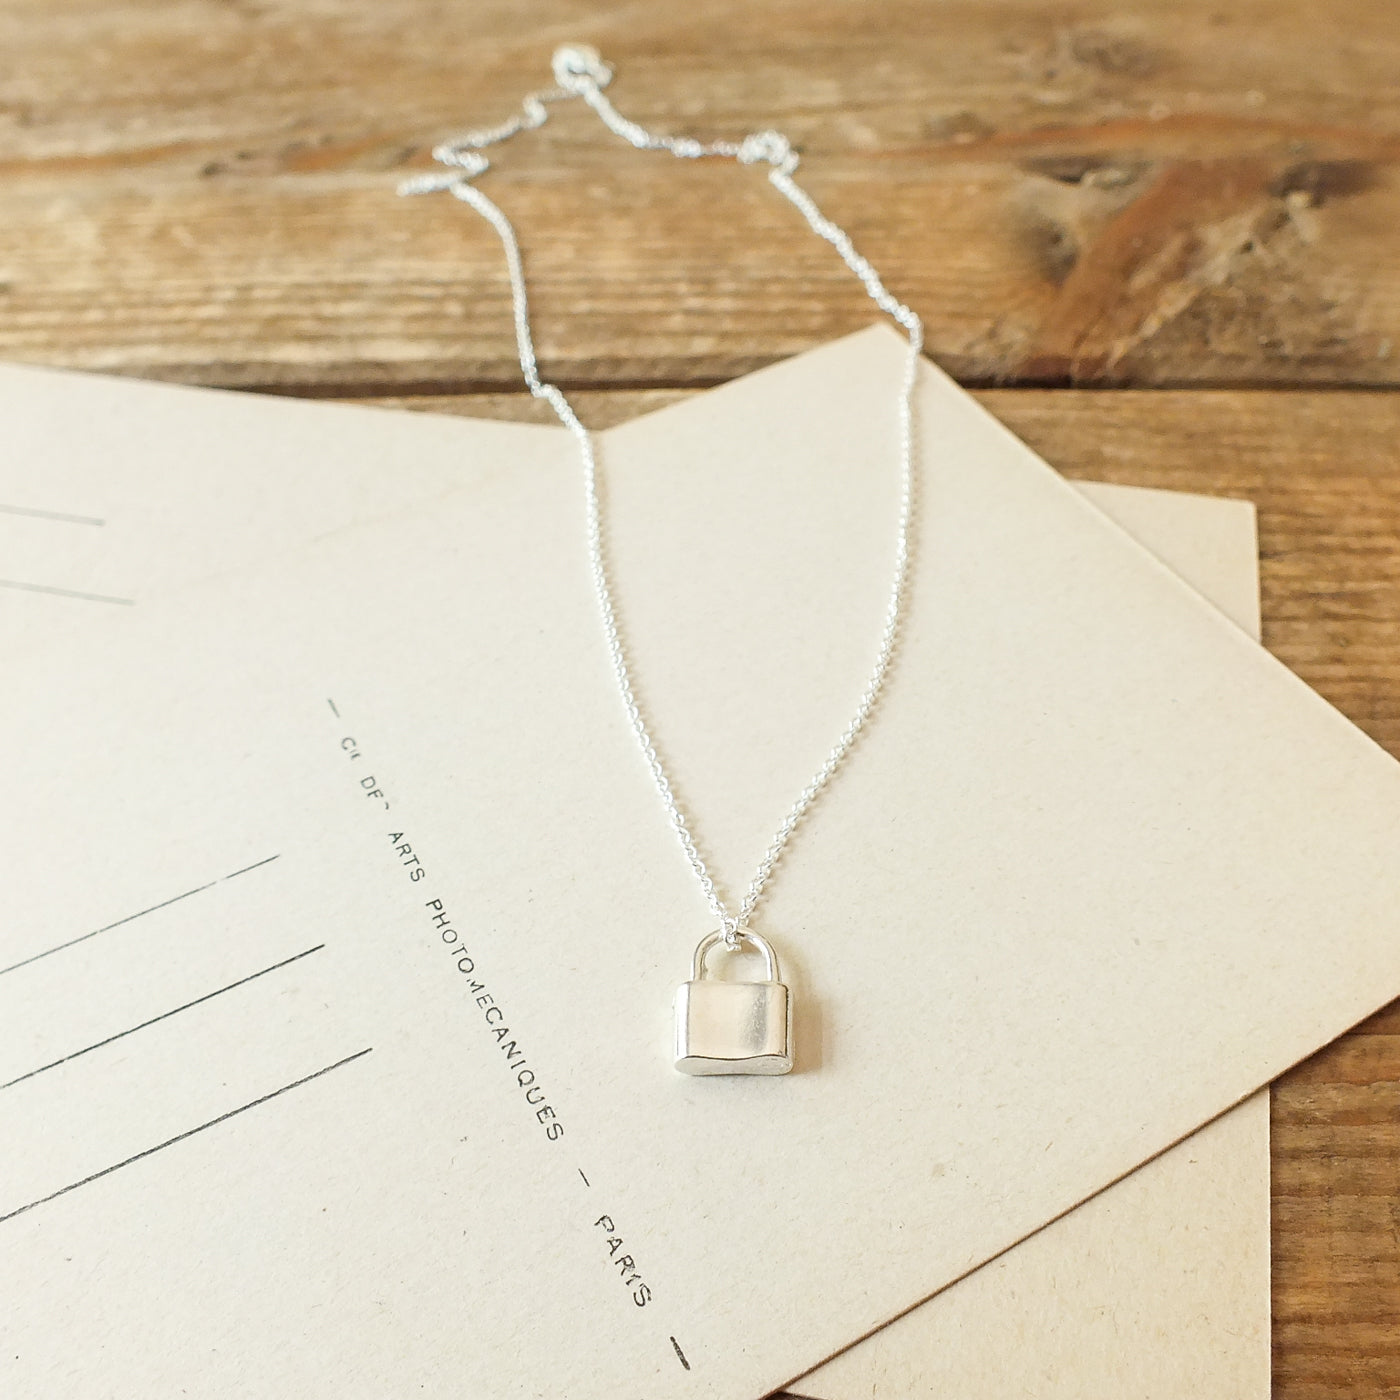 Hidden Treasures Necklace by Becoming Jewelry with a padlock pendant displayed on a beige card.